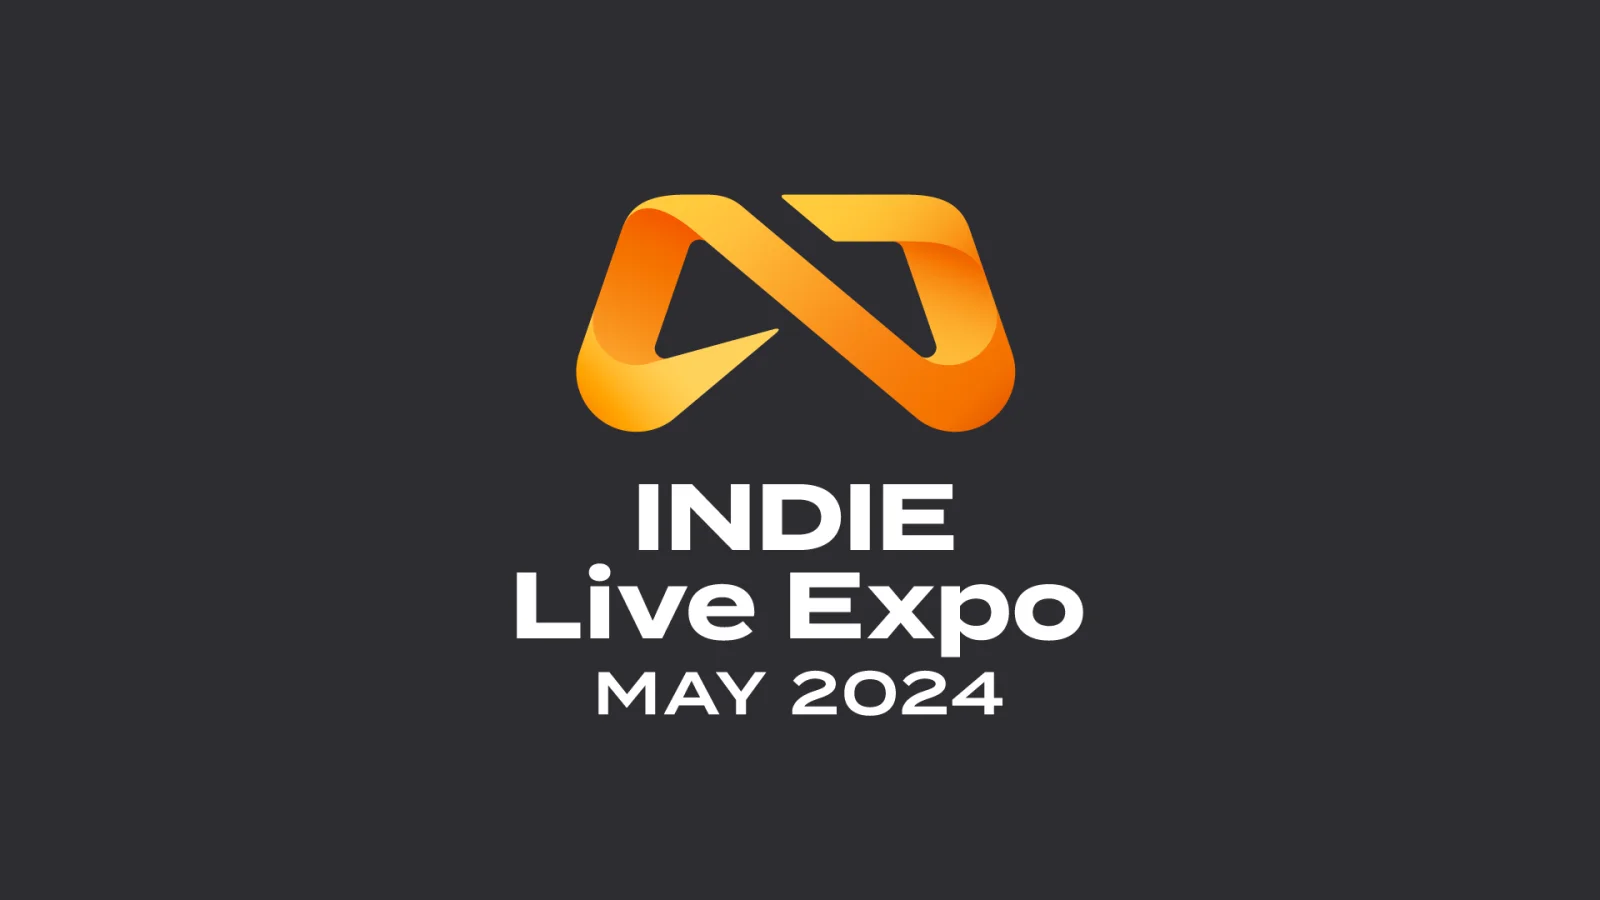 INDIE Live Expo参展游戏绝赞报名中！